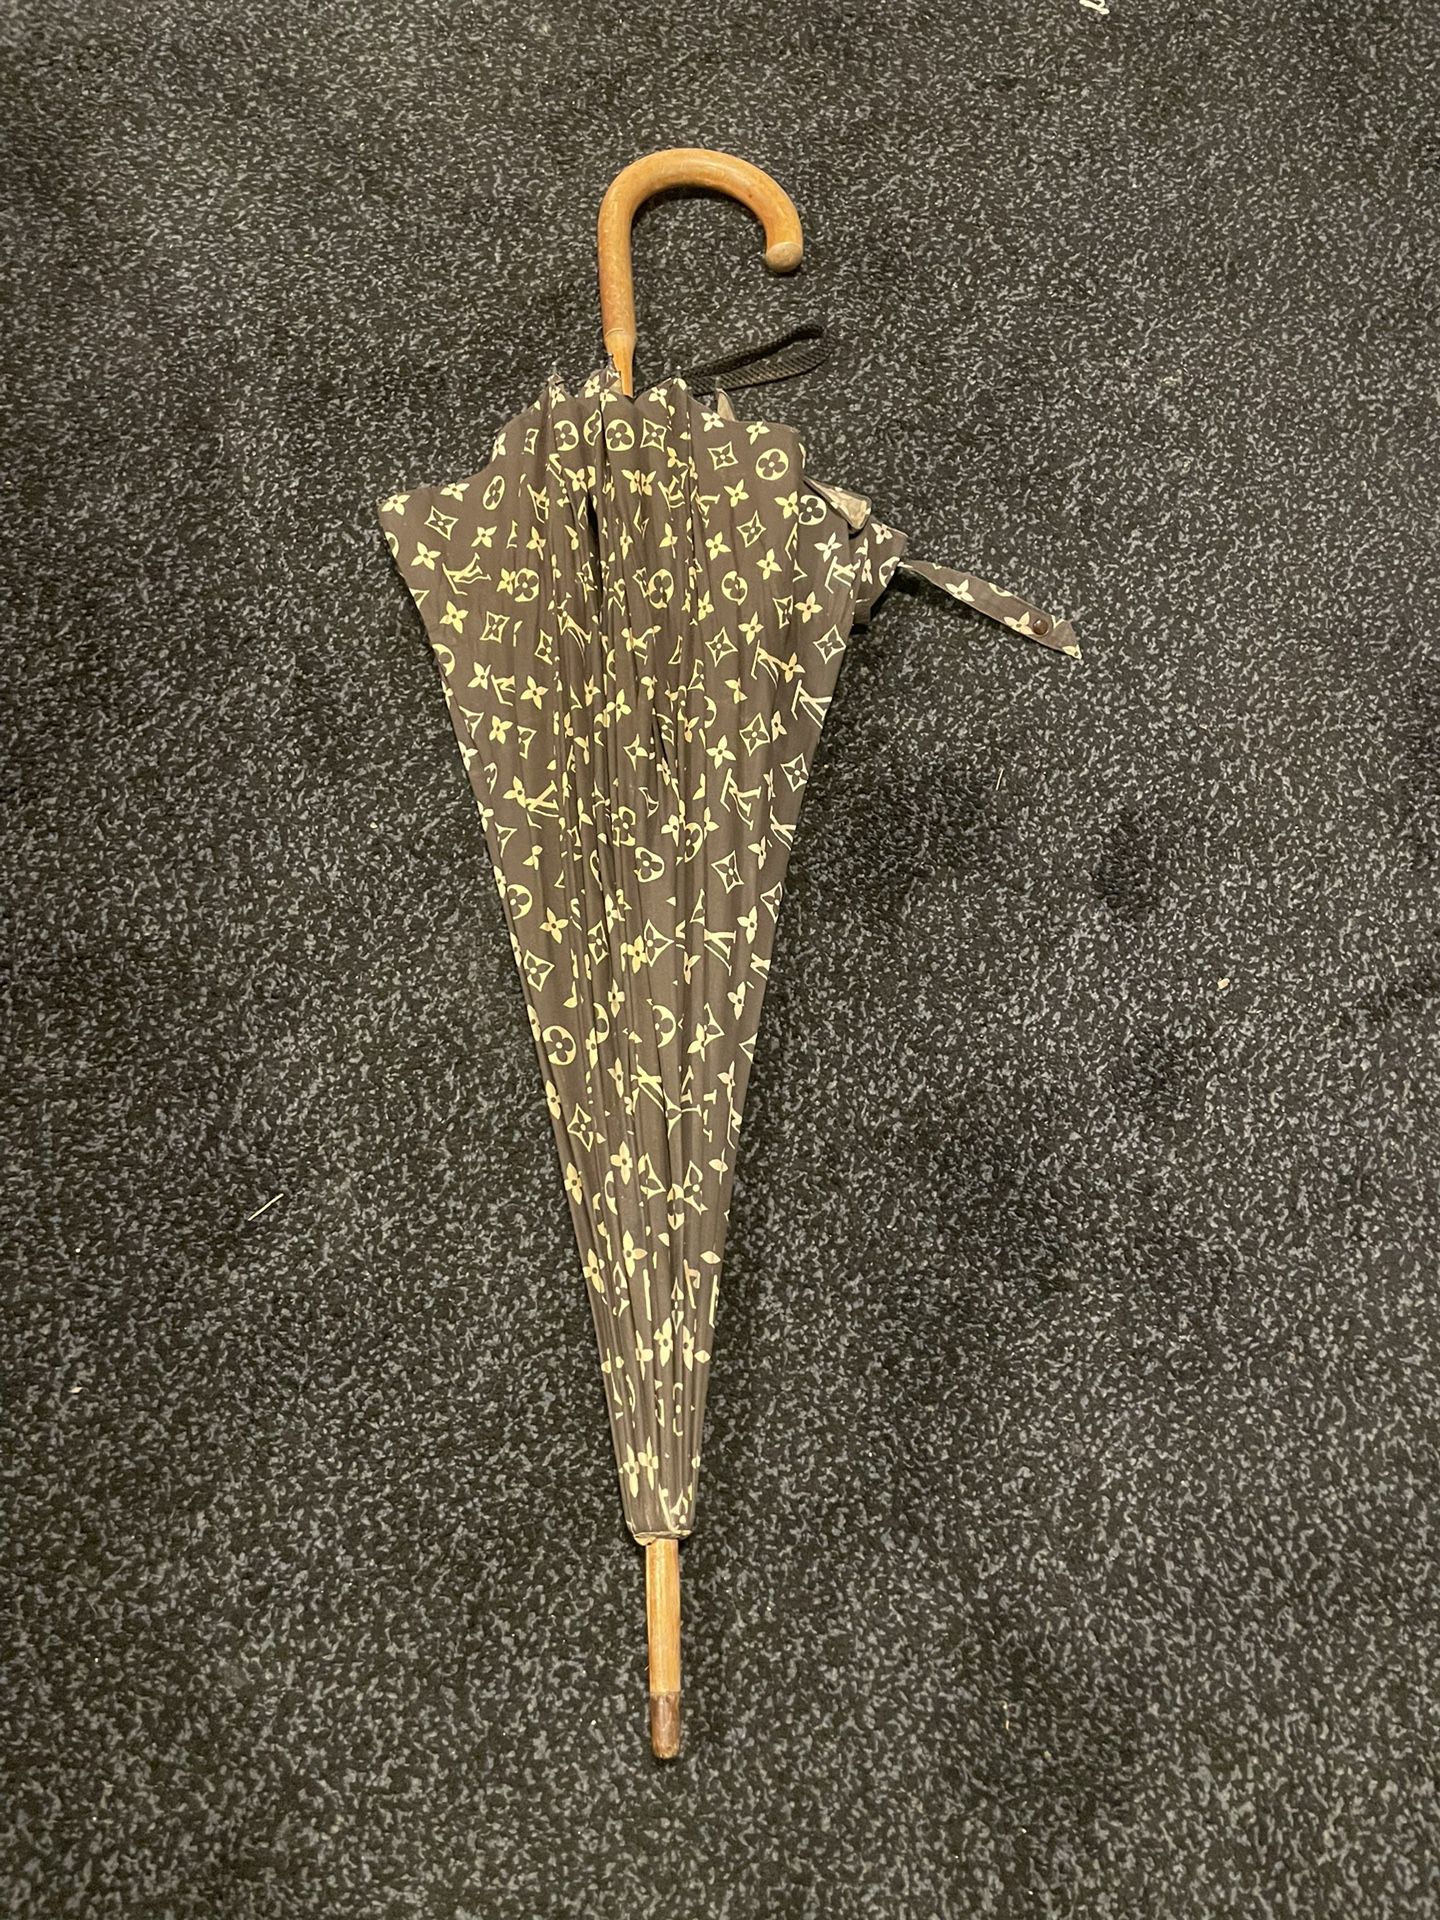 Vintage 1960's Louis Vuitton Umbrella Made In France for Sale in